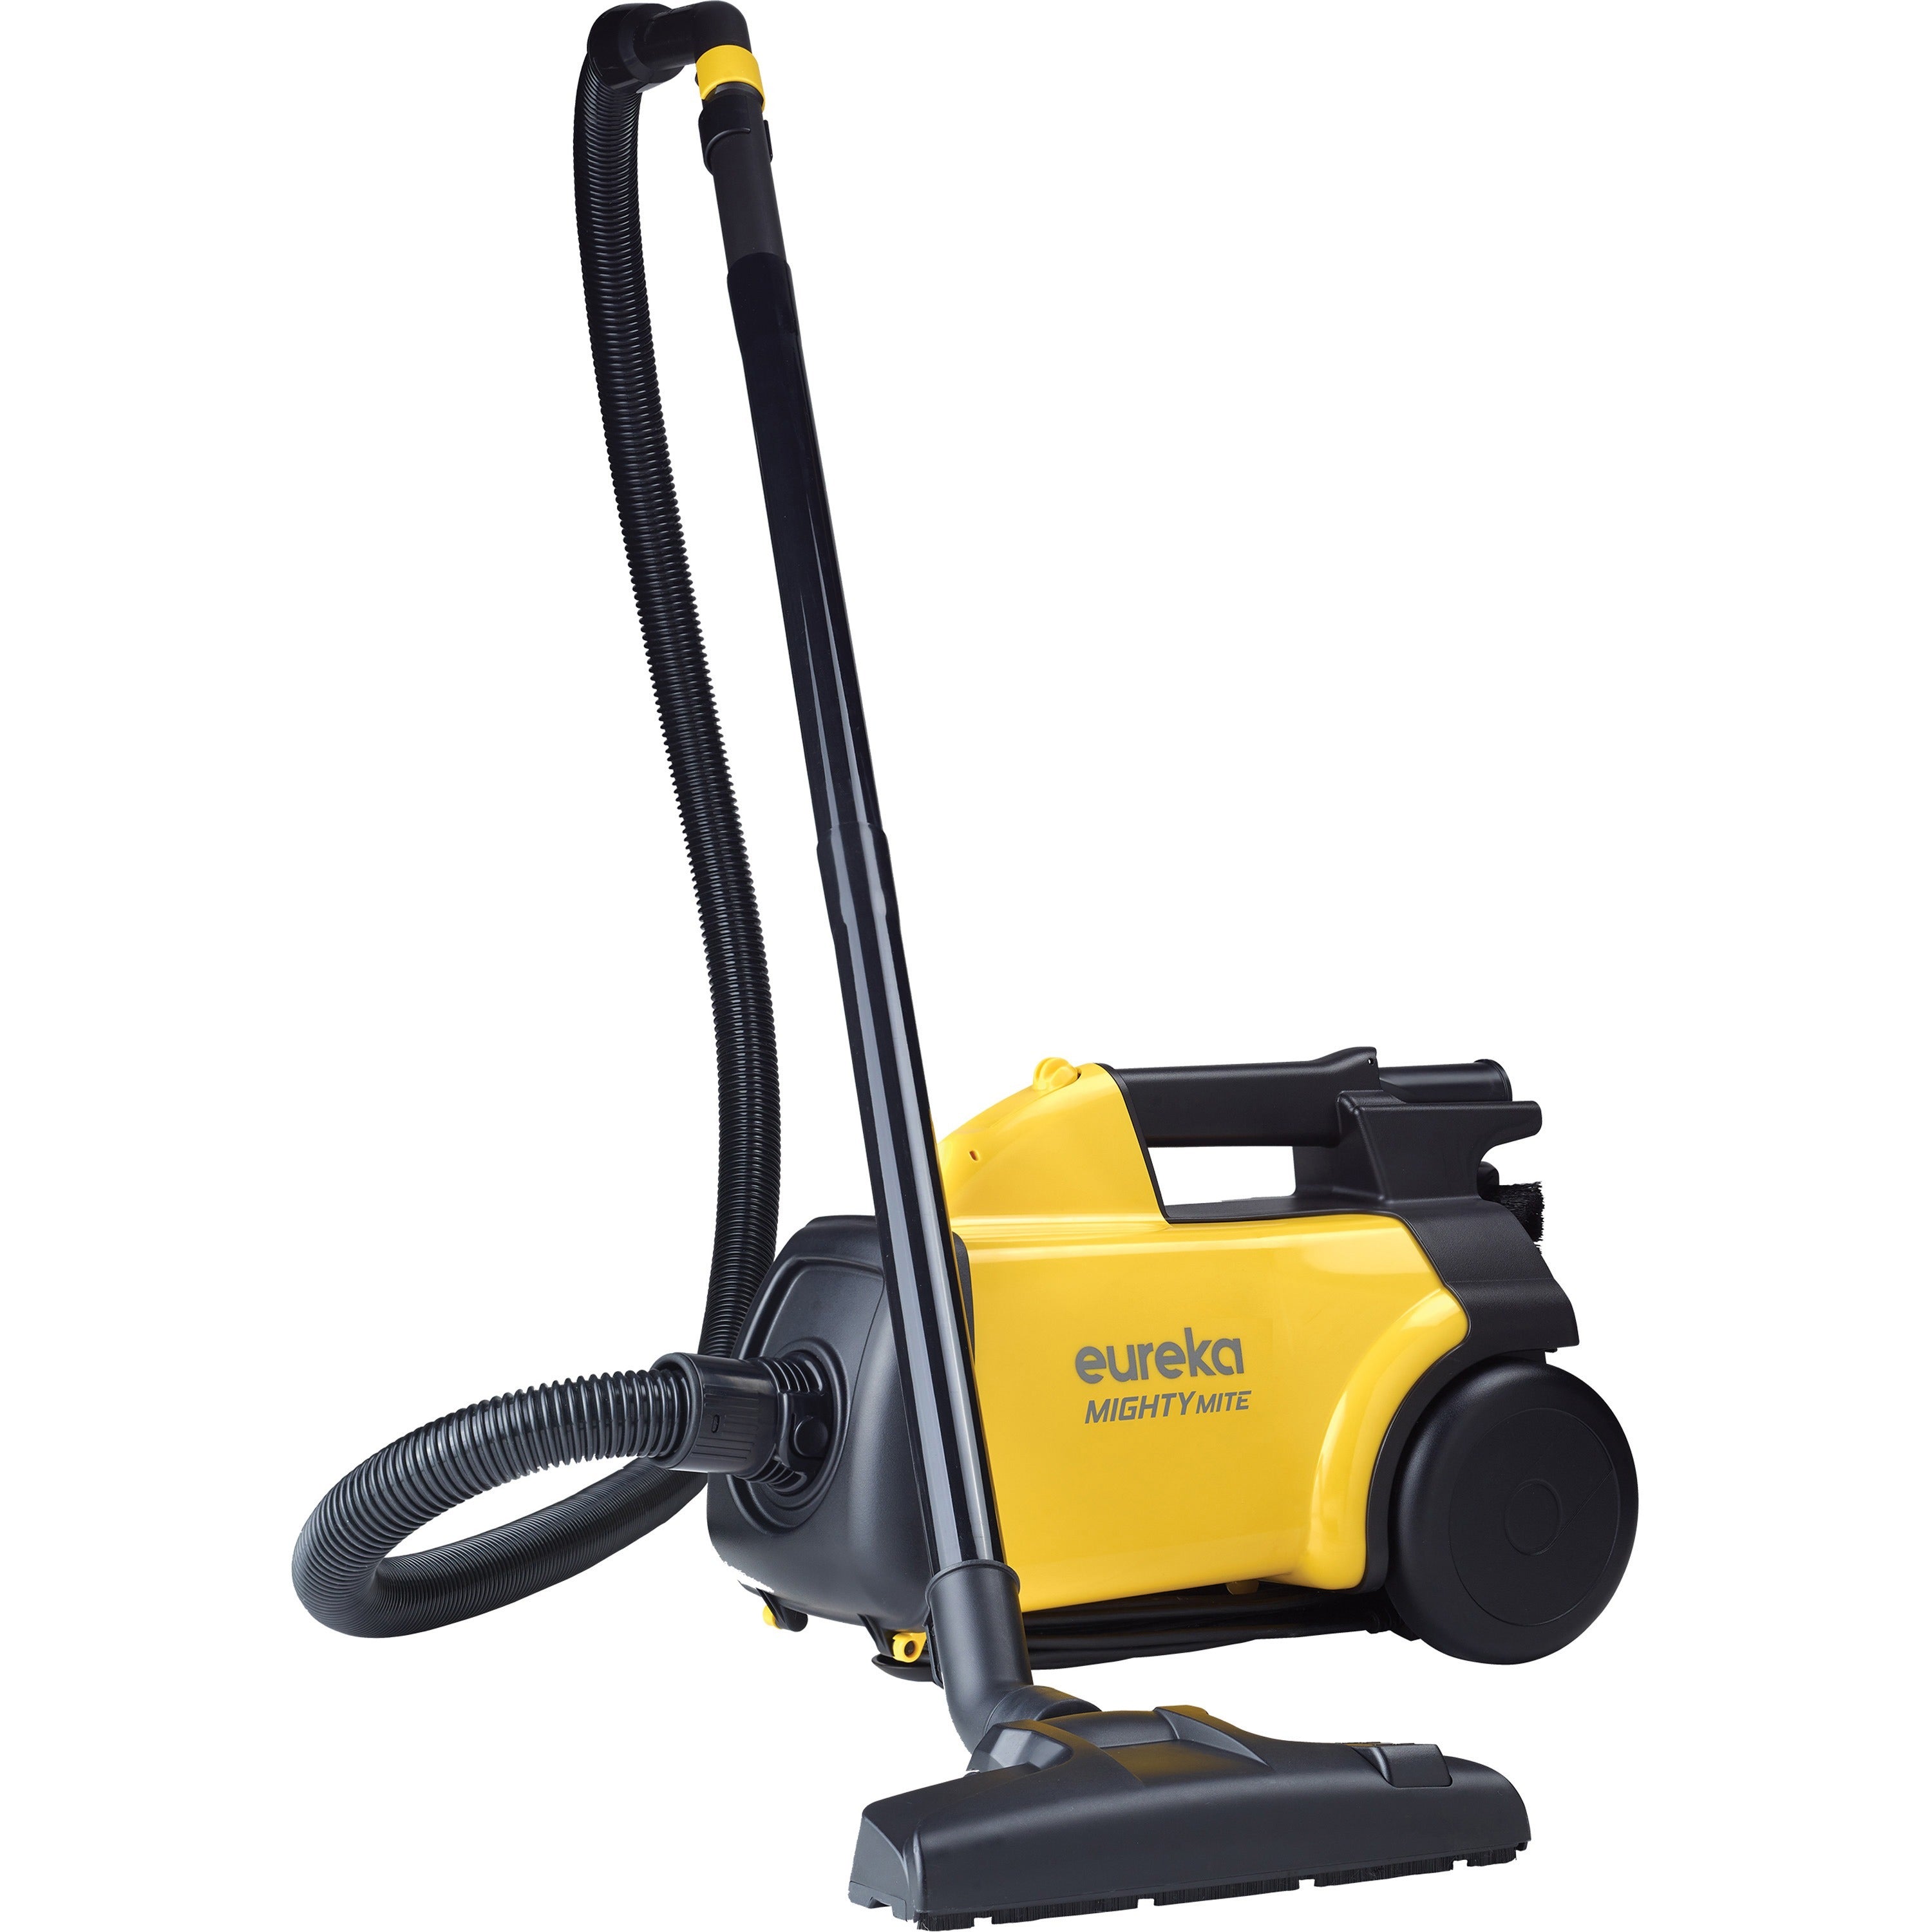 eureka-mighty-mite-3670g-canister-vacuum-cleaner-11-cleaning-width-12-a_nen3670g - 1